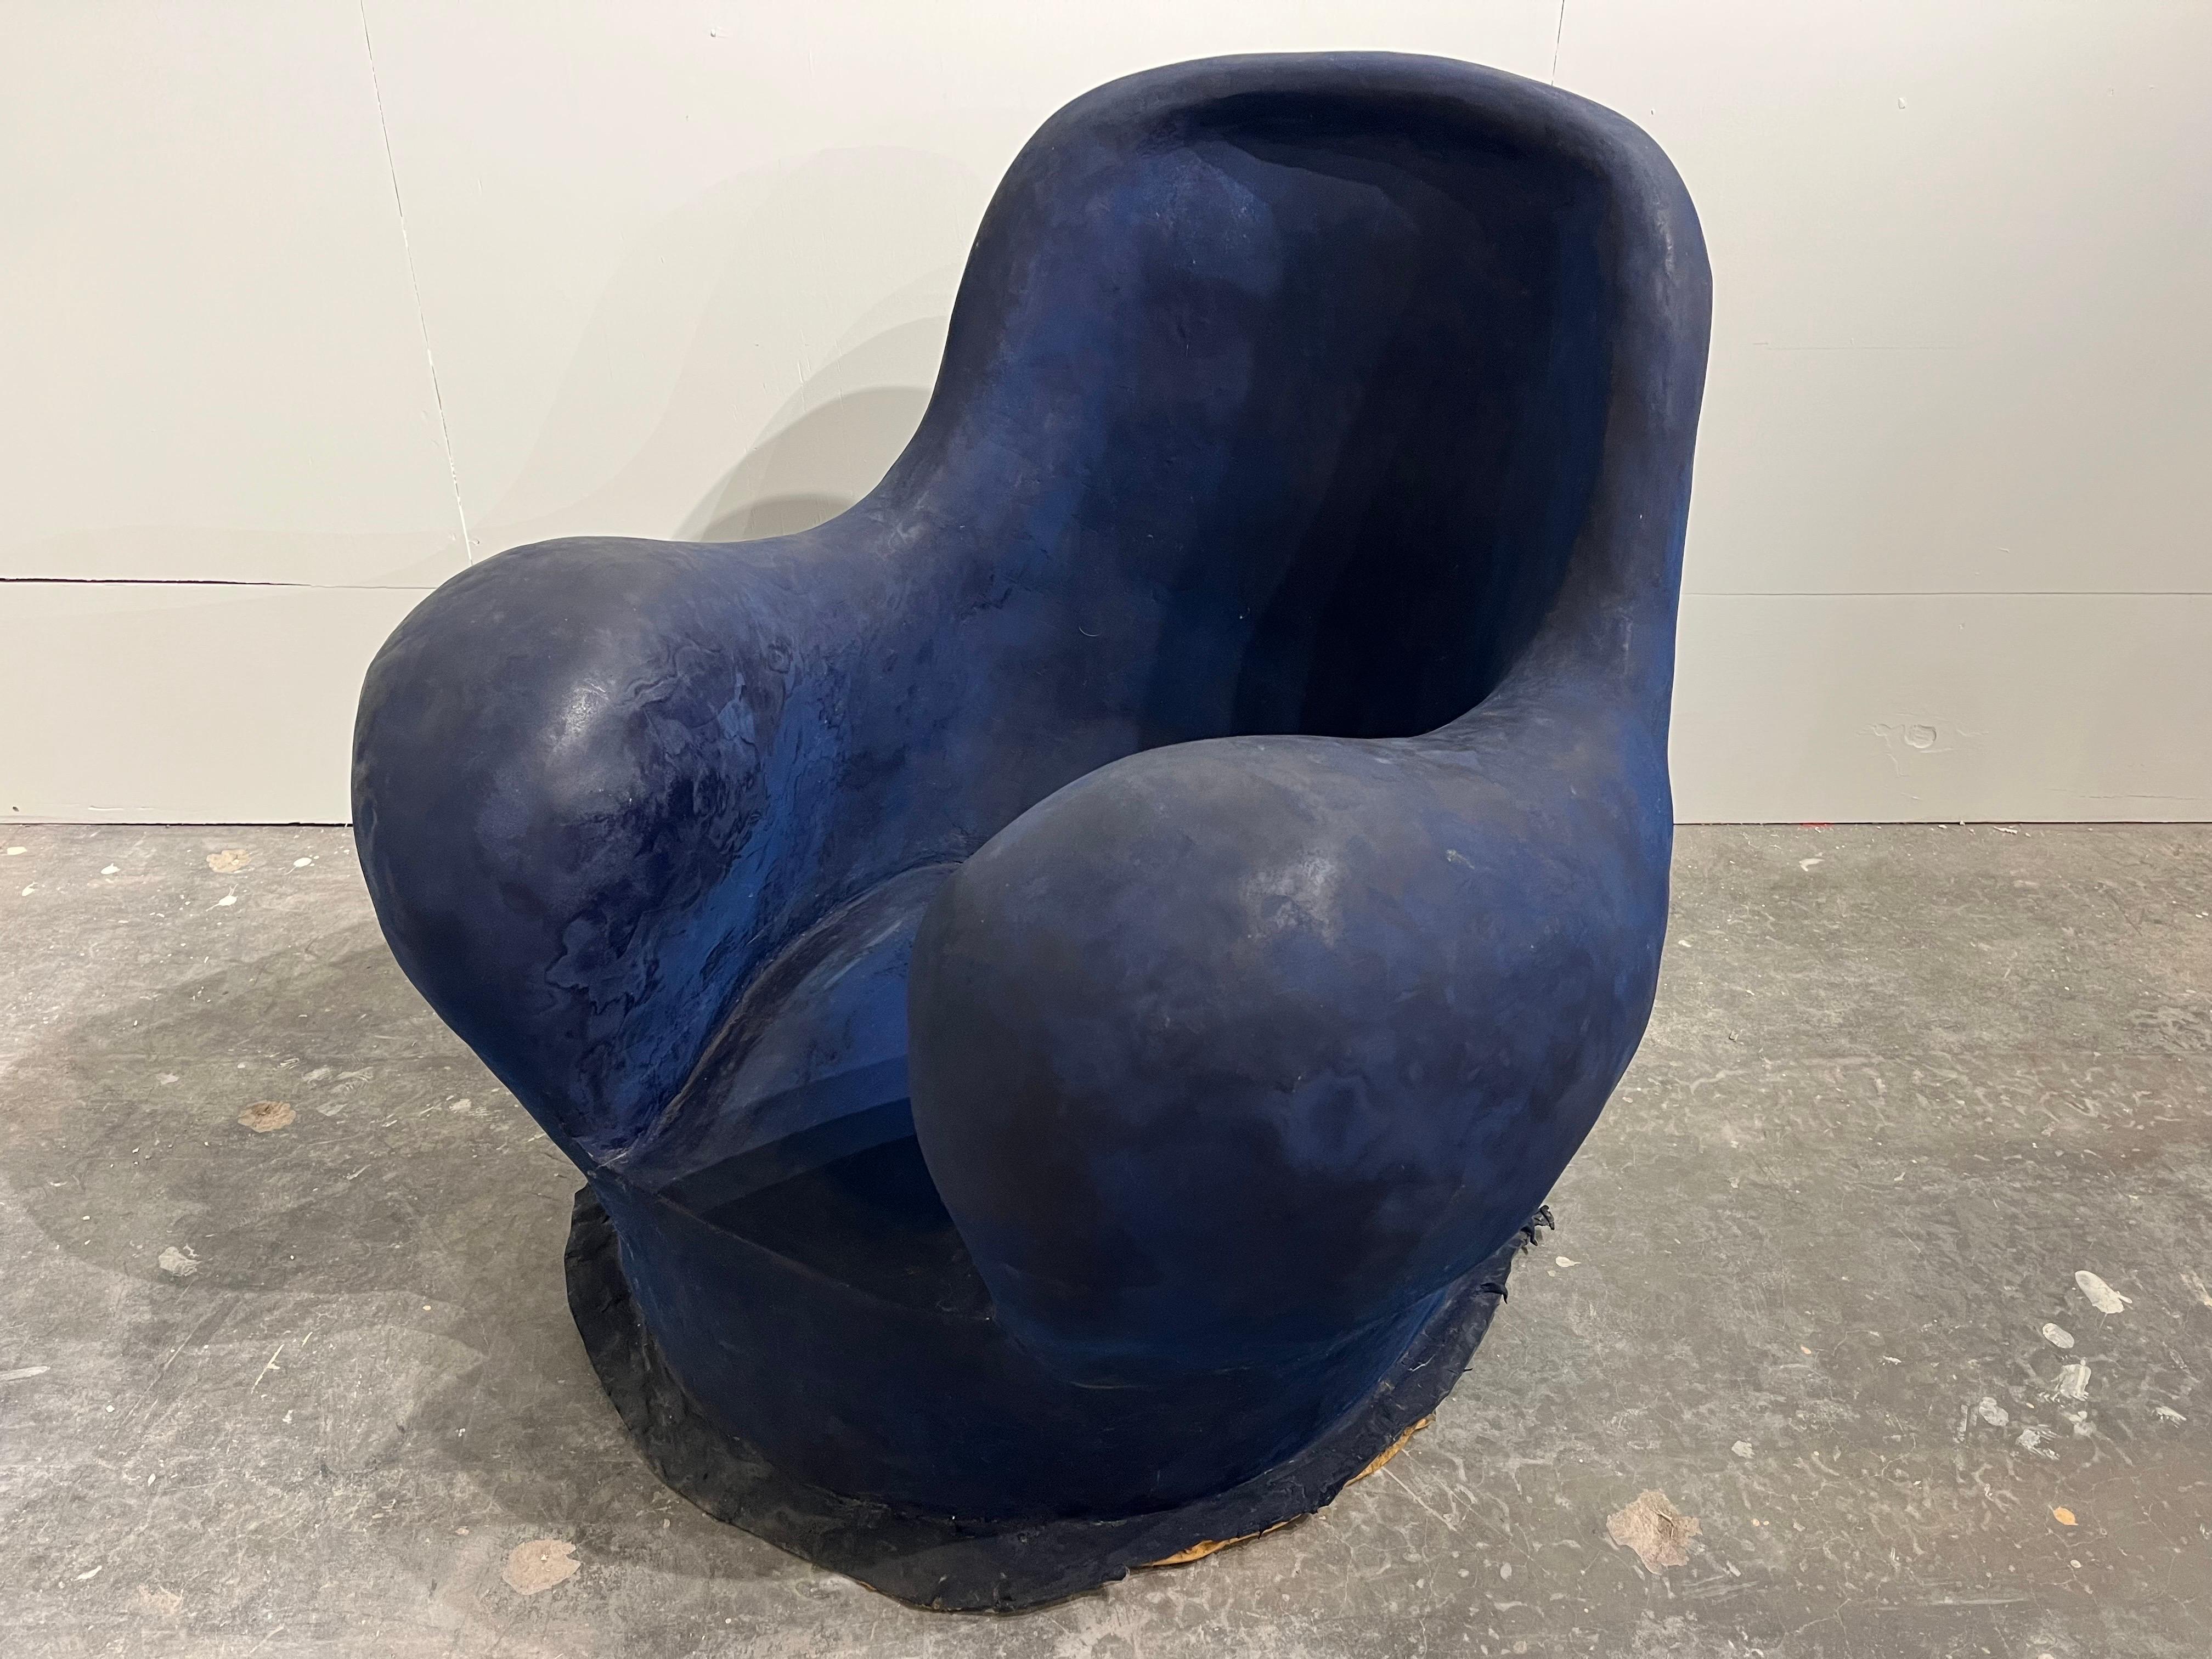 A late 1970's, post modern or pop art sculptural chair by French artist and scientist Louis Durot (b. 1939). - This is one of three works that I am offering through my 1stdibs storefront, HKFA. Search HKFA on 1stdibs, view my storefront and see the